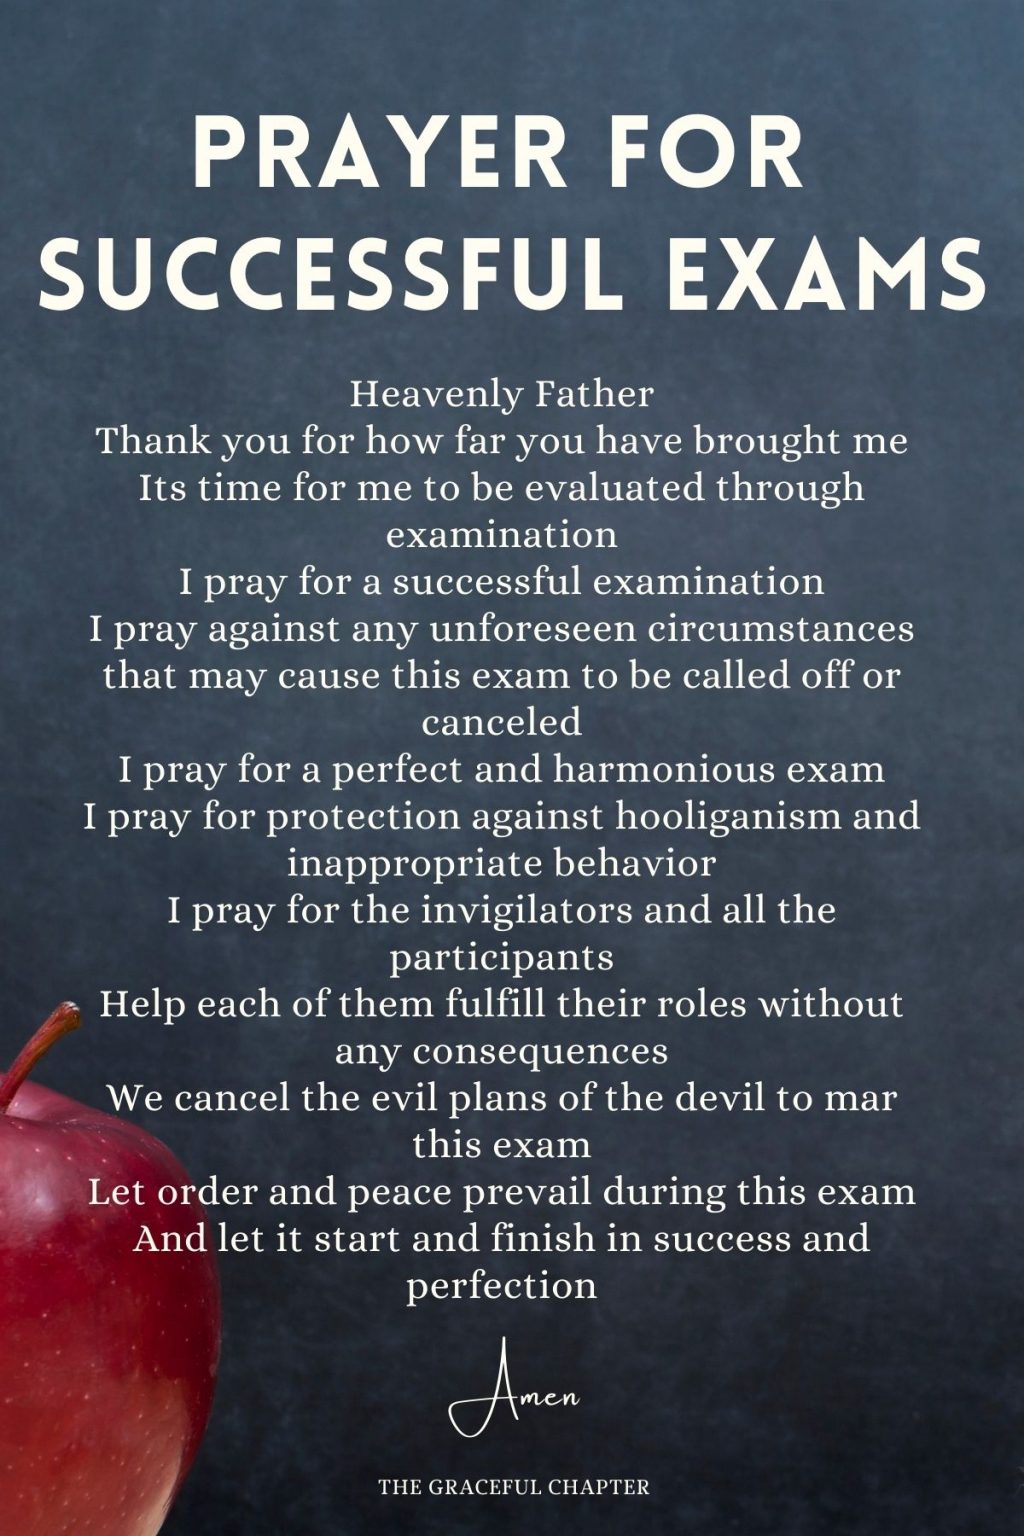 9 Short Prayers For Exams The Graceful Chapter 9658